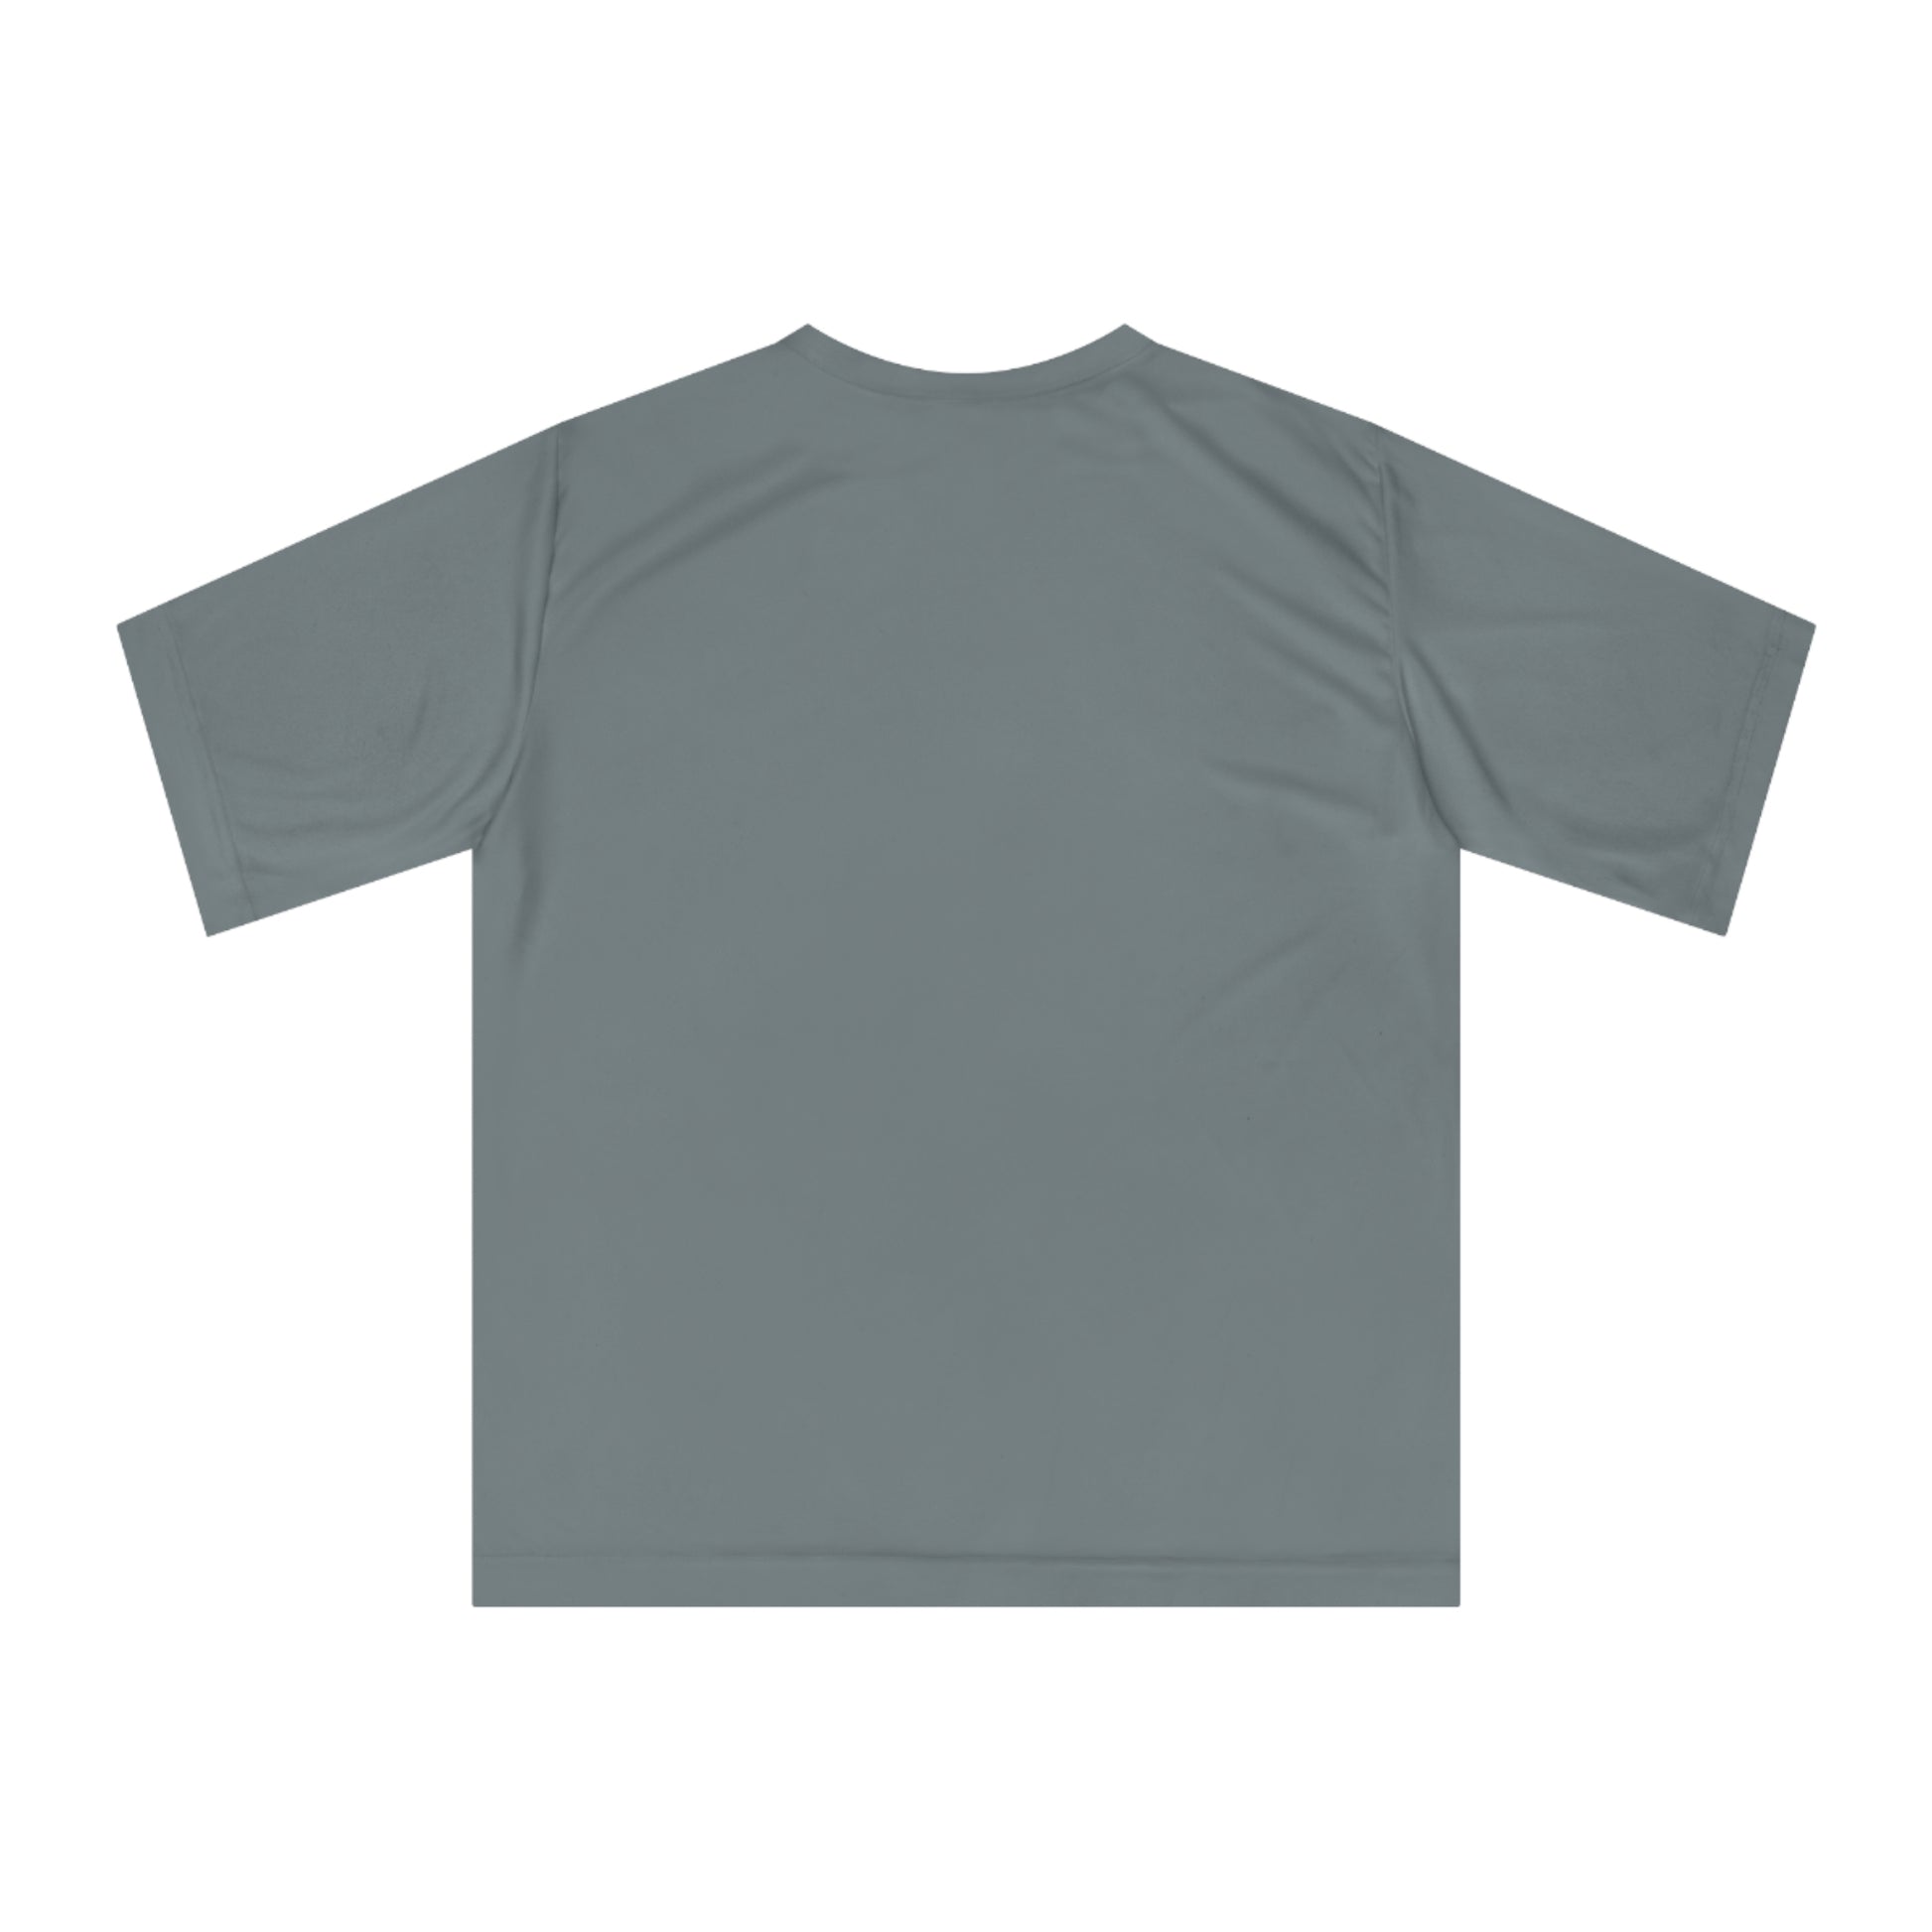 Flat back view of the Sport Graphite shirt